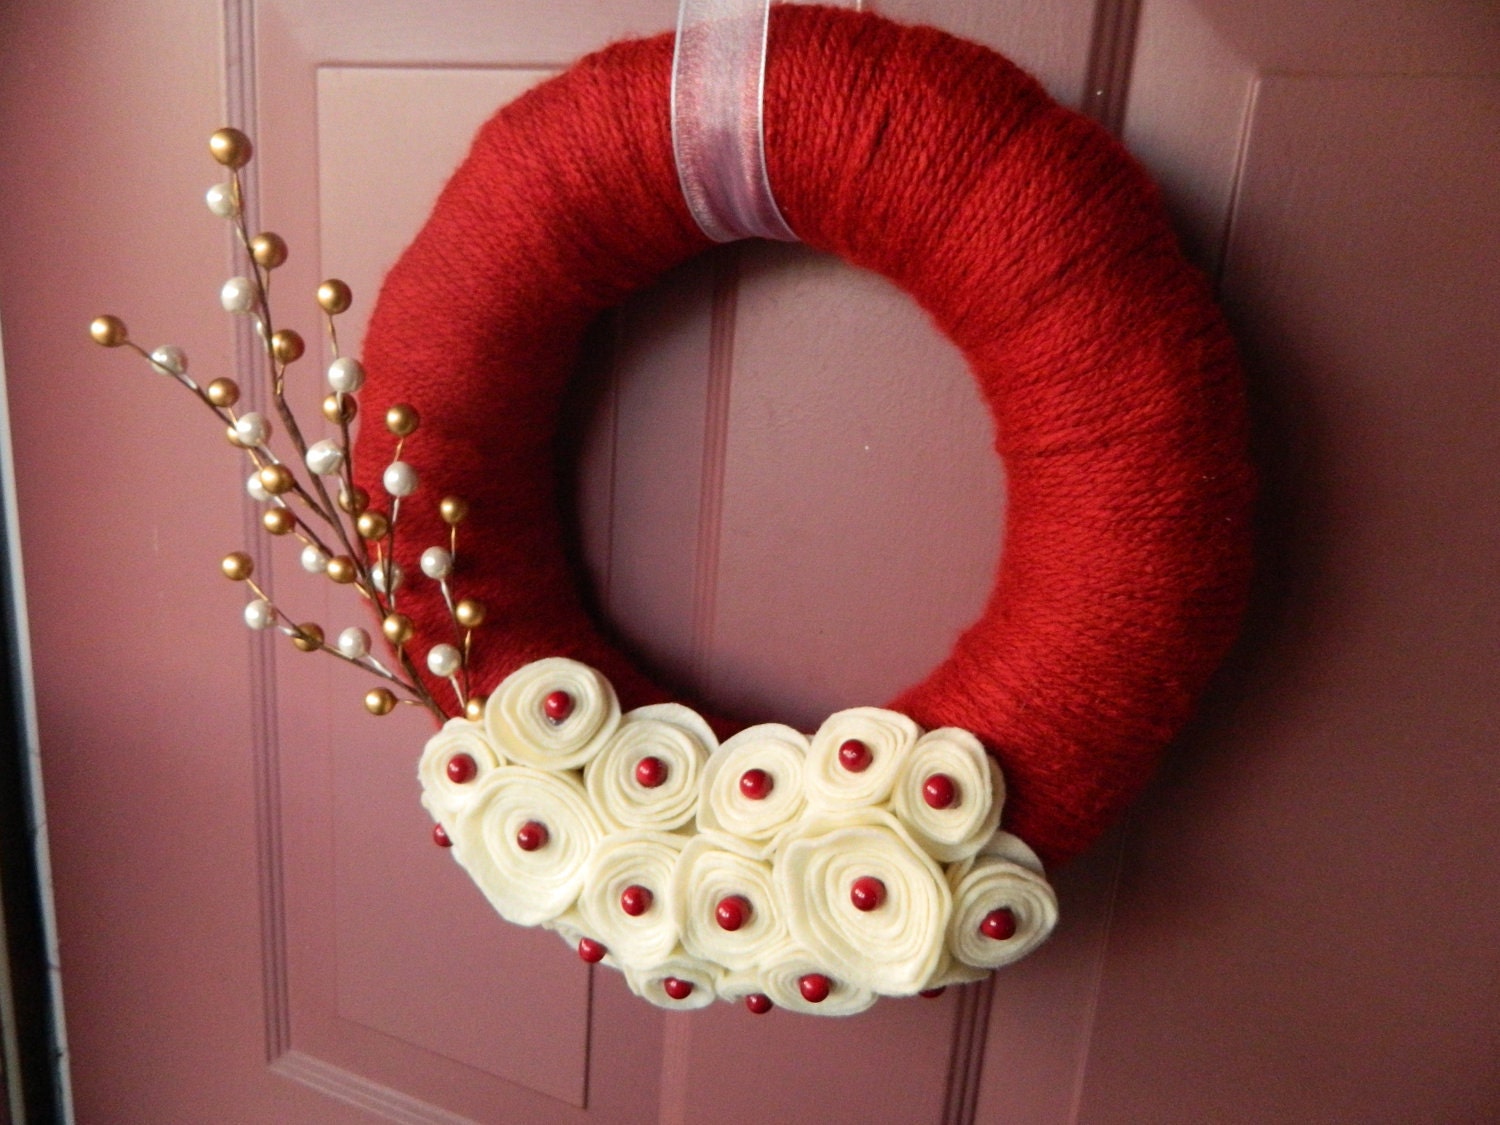 Red Yarn Wrapped Wreath with Cream Felt Flowers and Cranberry Accents